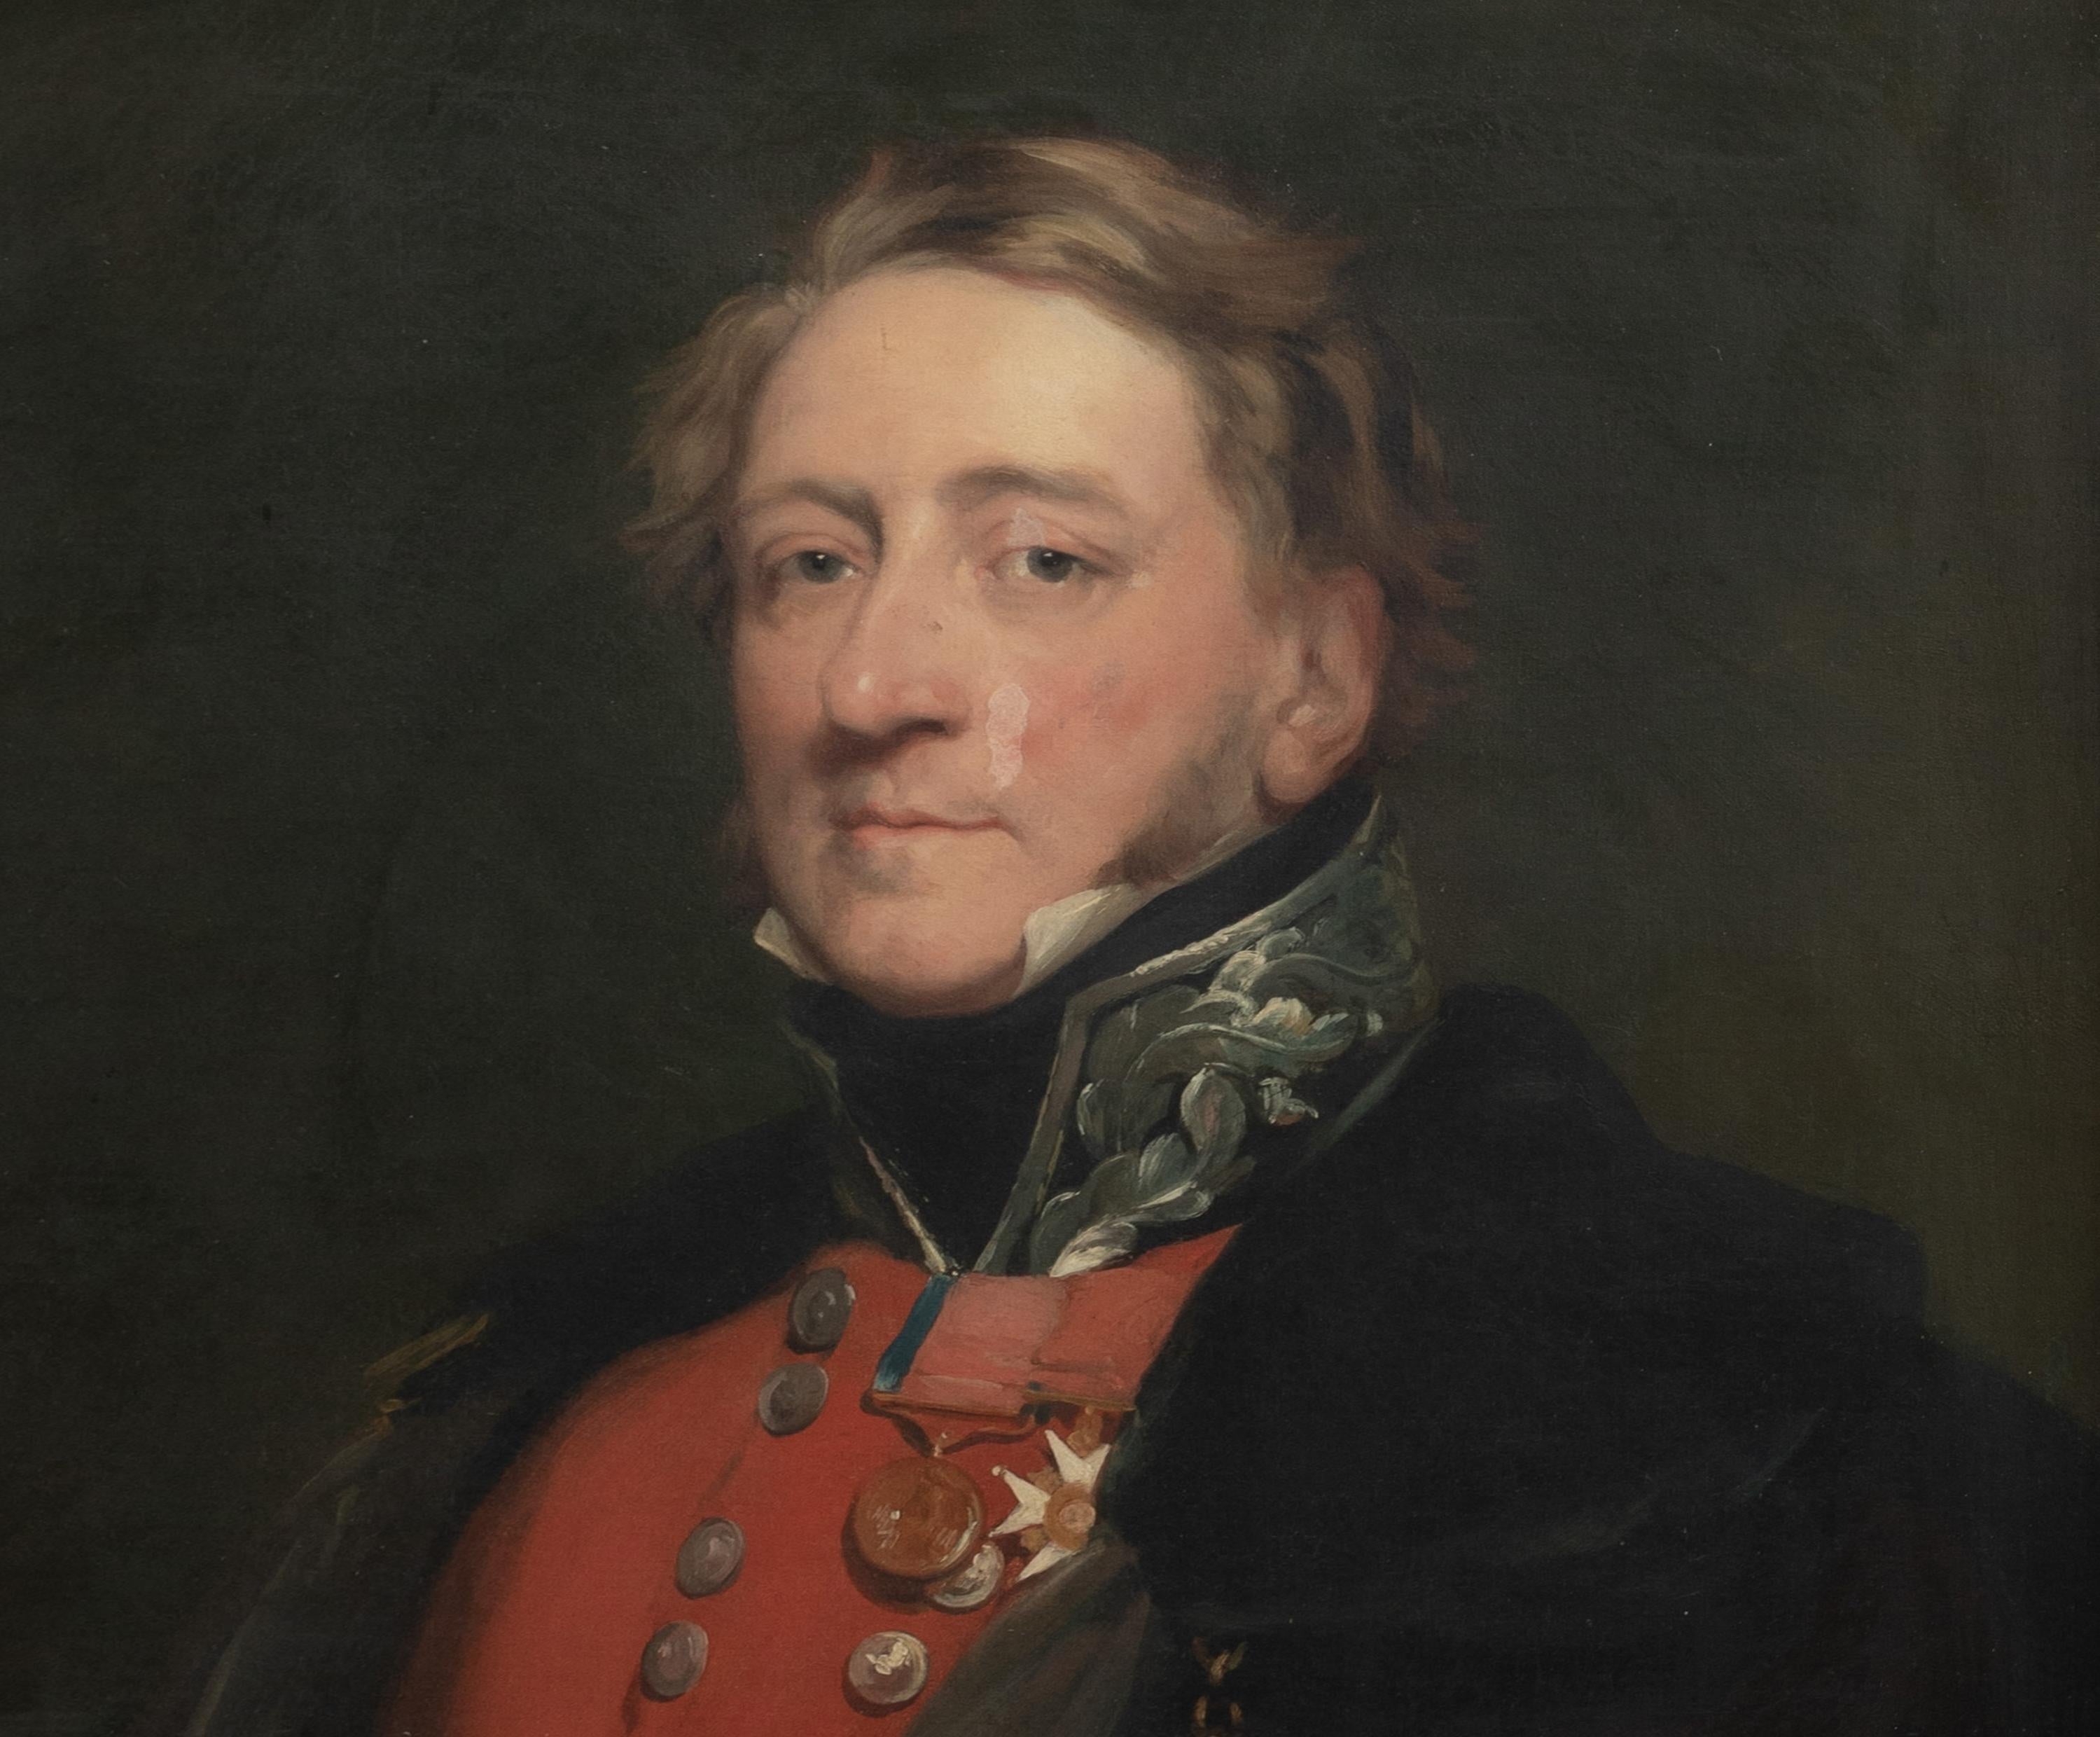 Portrait of A British Officer, traditionally identified as Leiutentant-General Sir John Moore (1761-1809),

School of Sir Thomas Lawrence (1769-1830)

Large early 19th Century Napoleonic Wars era portrait of a senior British Military Officer, oil on